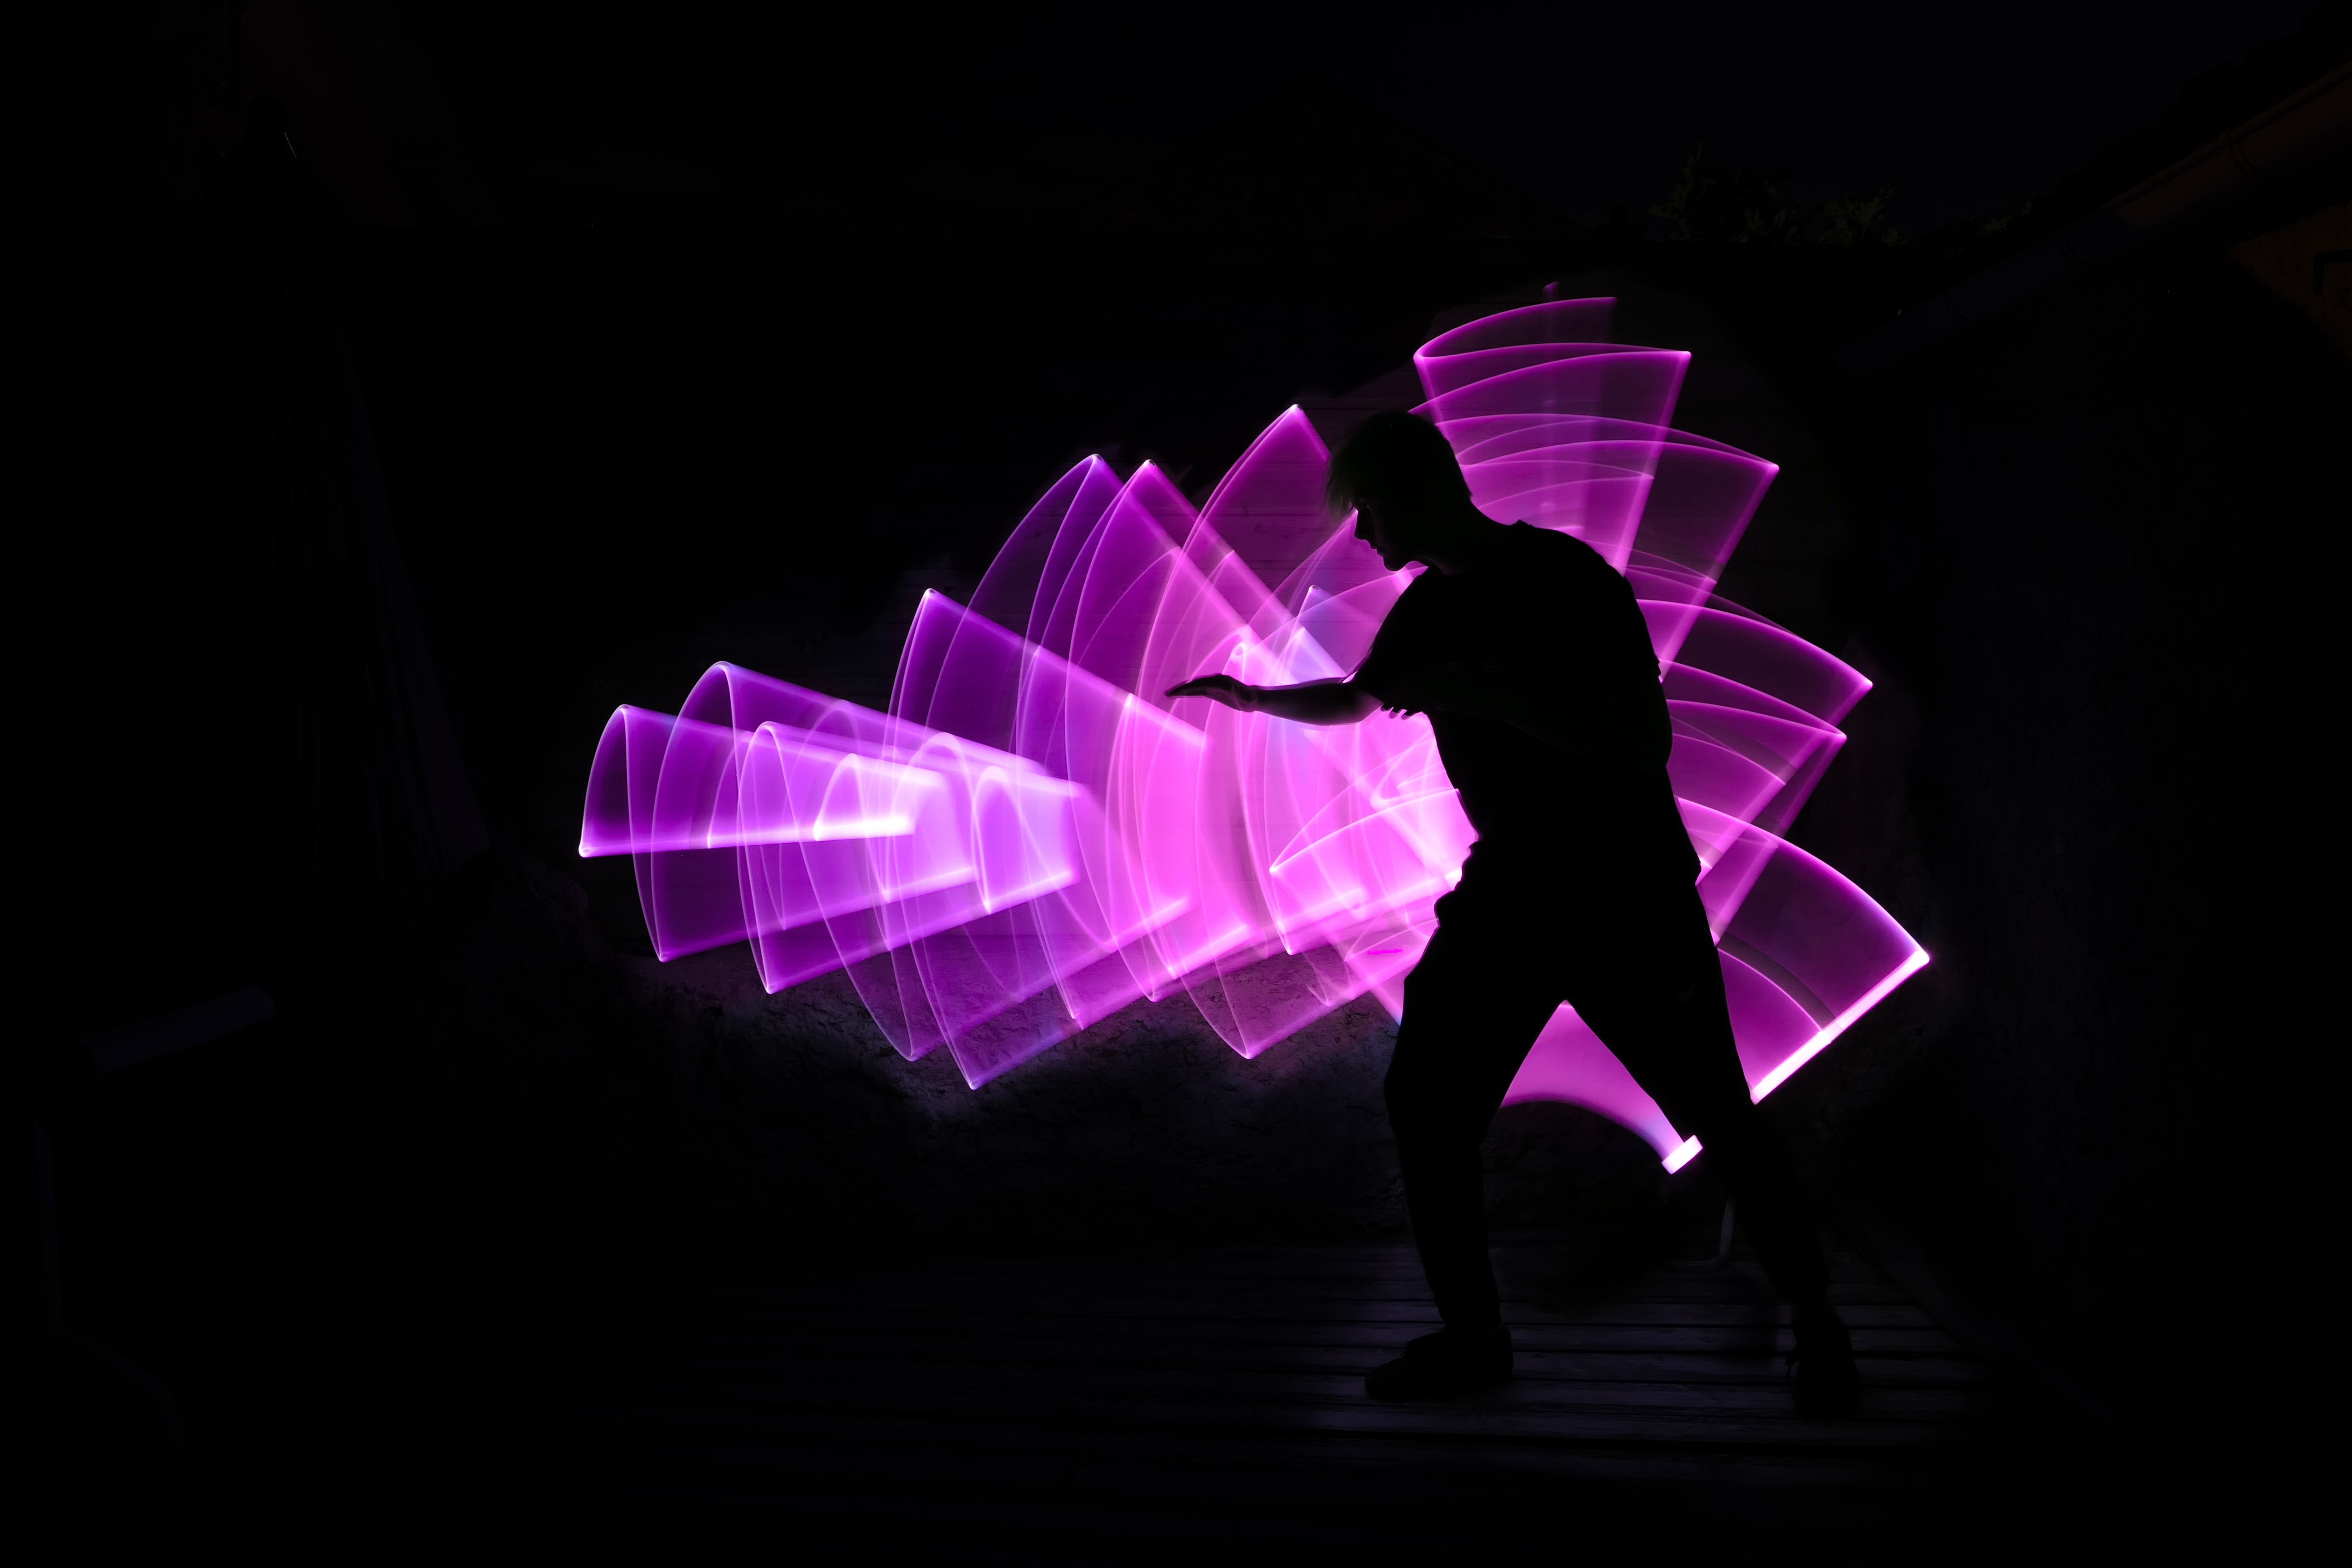 Silhouette of a person against art made my capturing light with long-exposure photography.